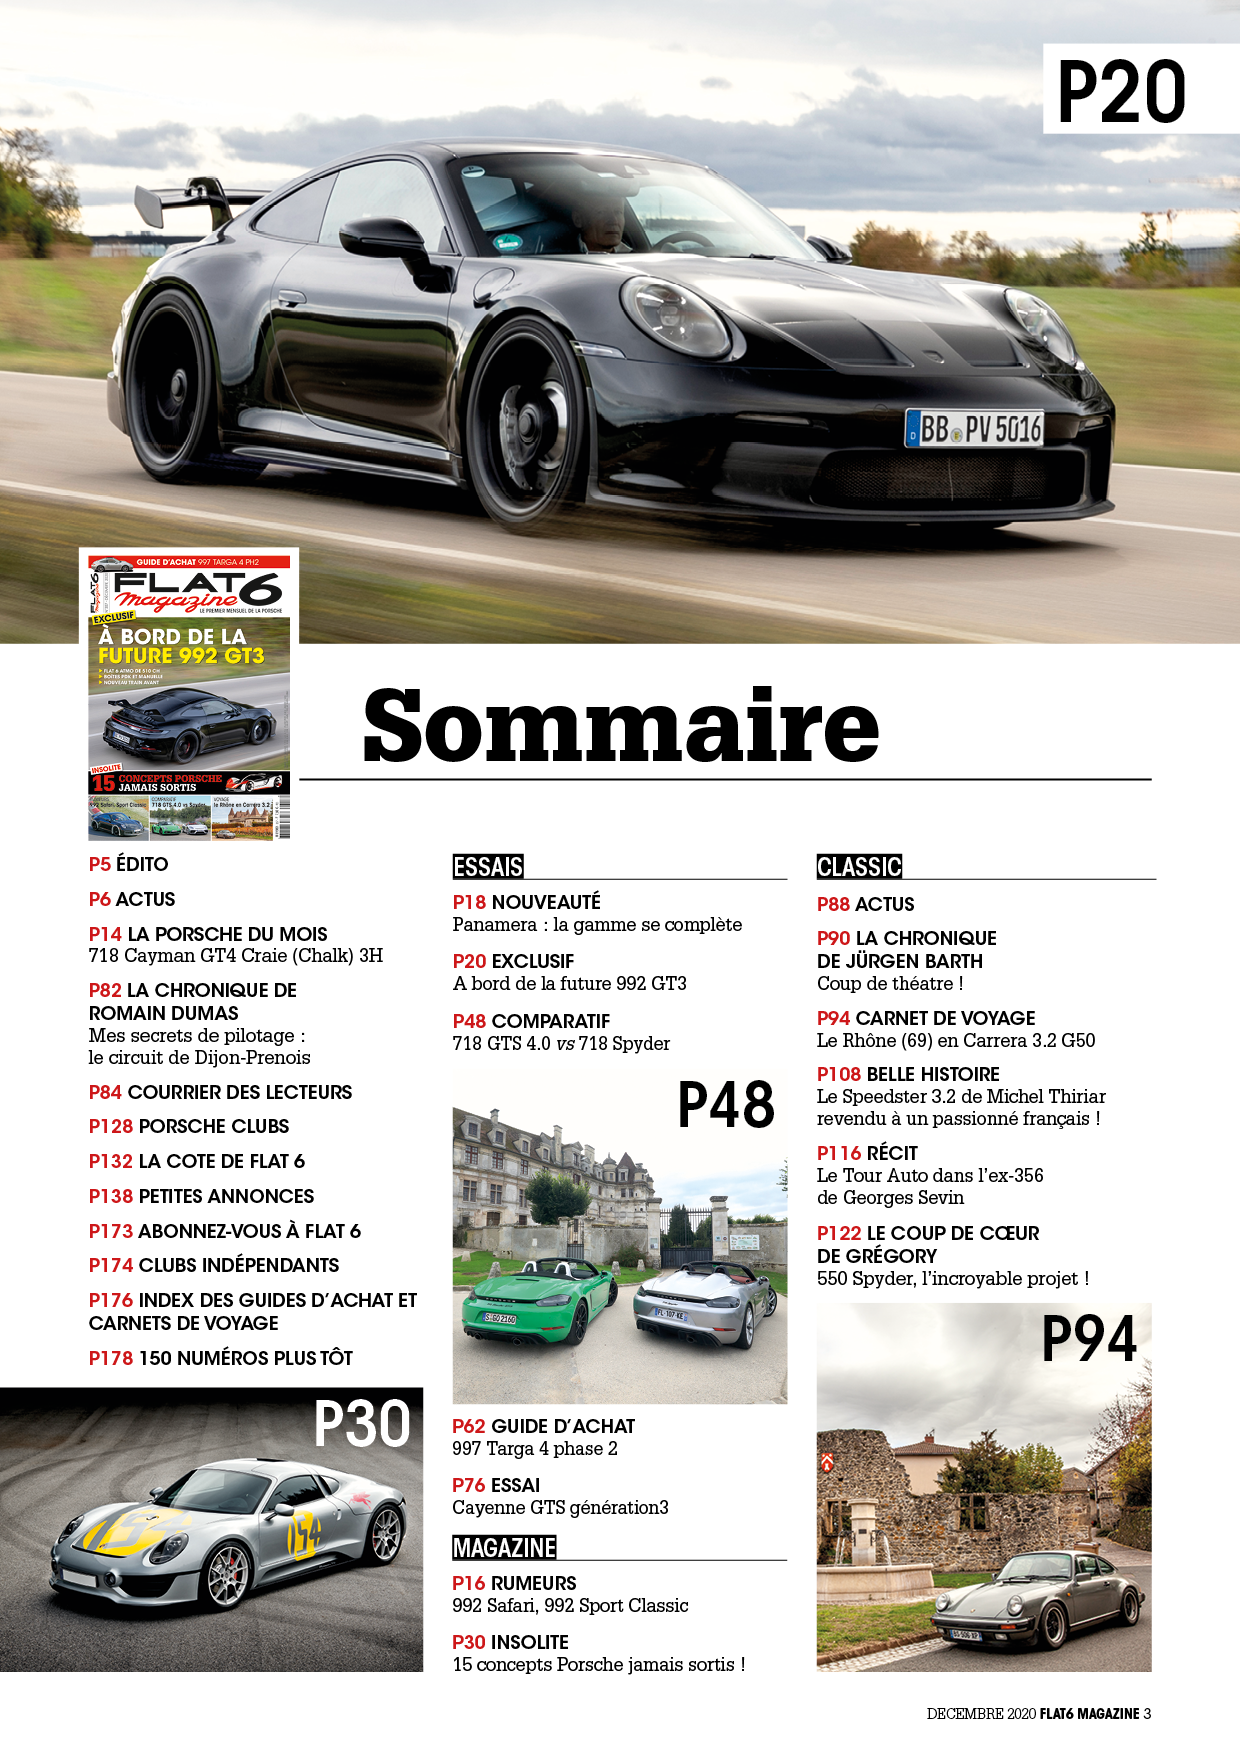 Sommaire357